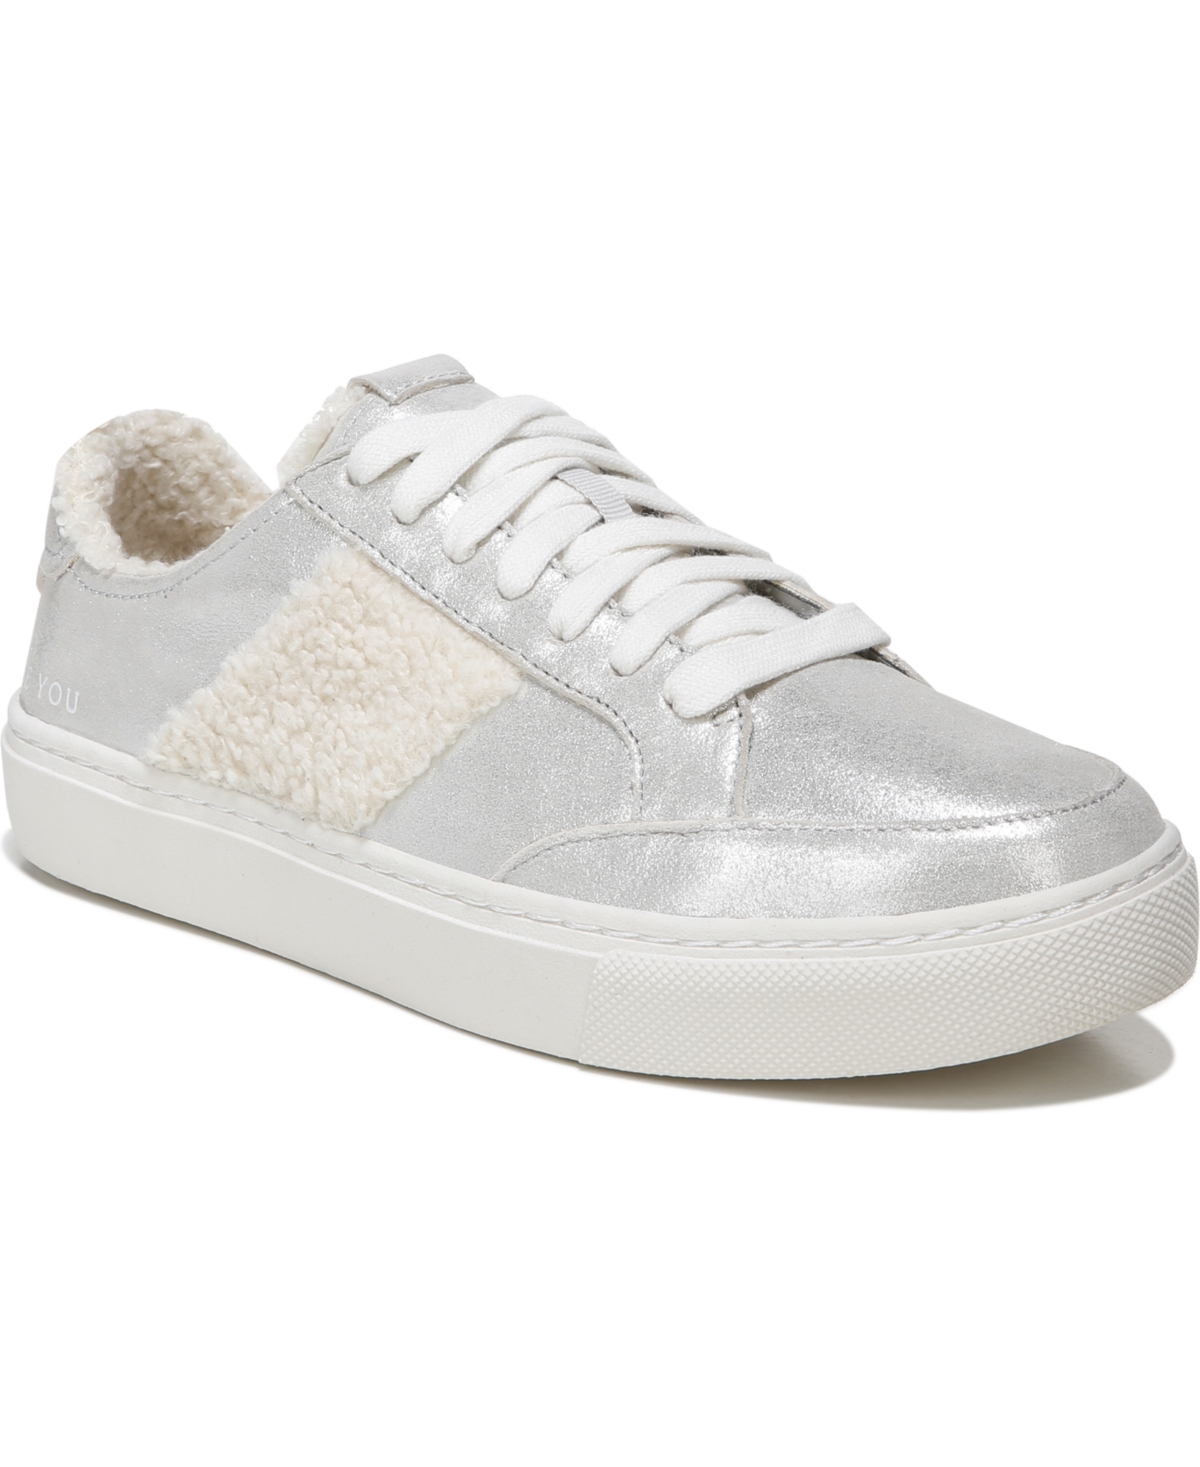 Women's All In Chill Oxfords - Silver Metallic Leather/Faux Shearling